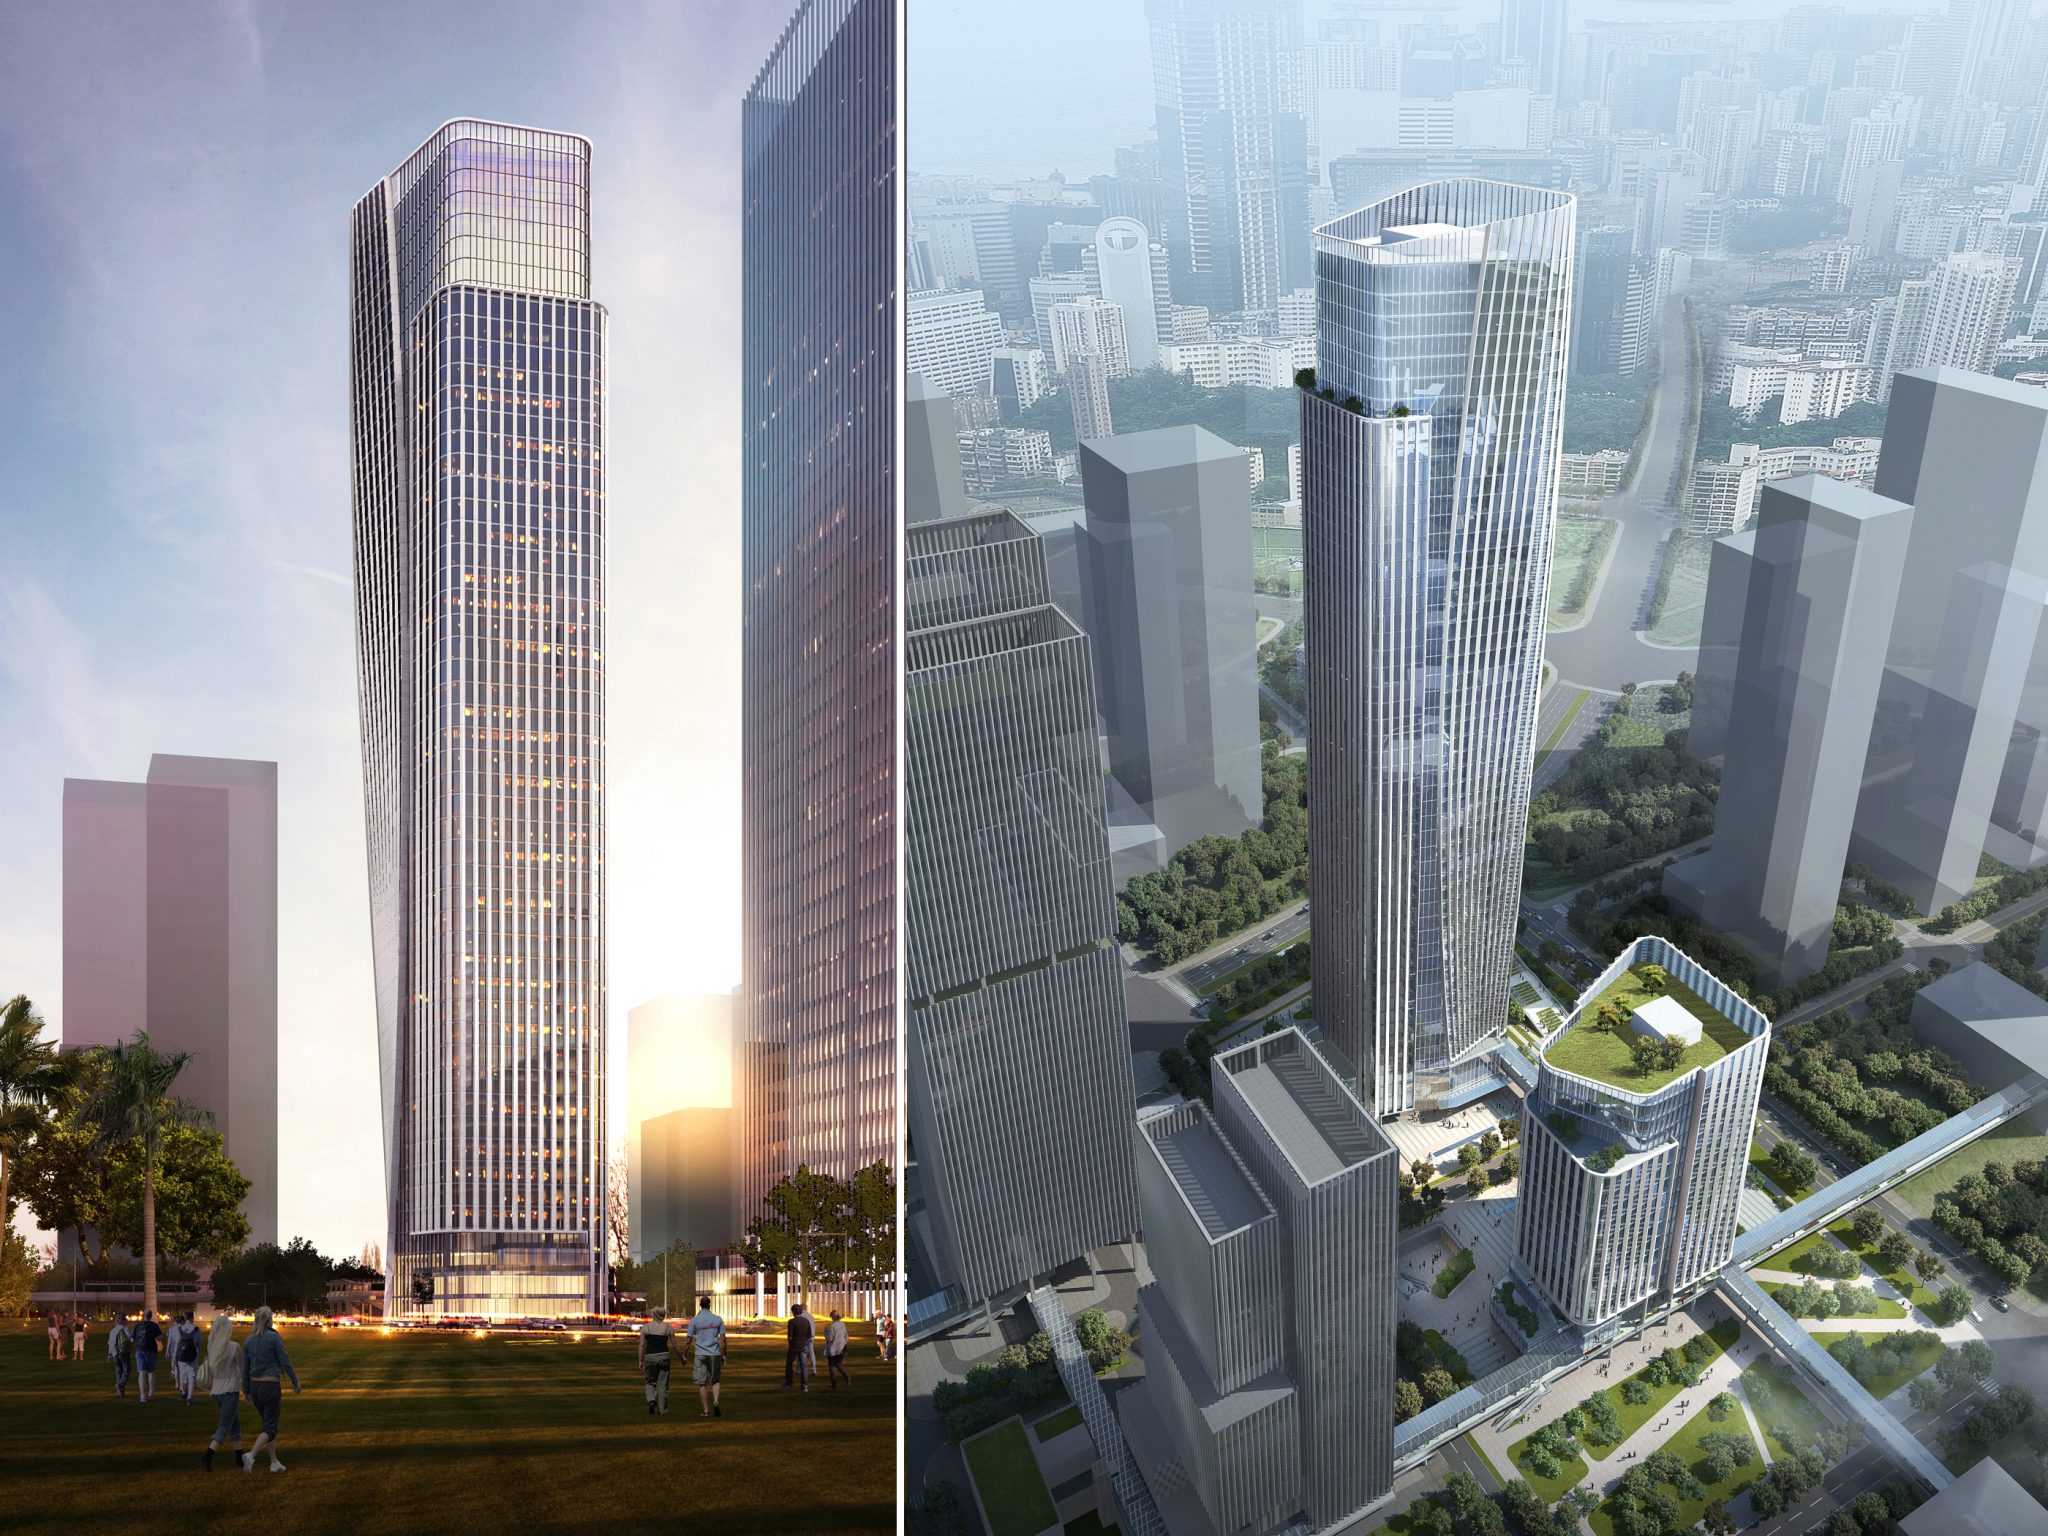 ARCHILIER TEAM WINS INTERNATIONAL COMPETITION TO DESIGN TWO OFFICE TOWERS IN SHENZHEN’S NEWLY-DEVELOPING QIANHAI DISTRICT